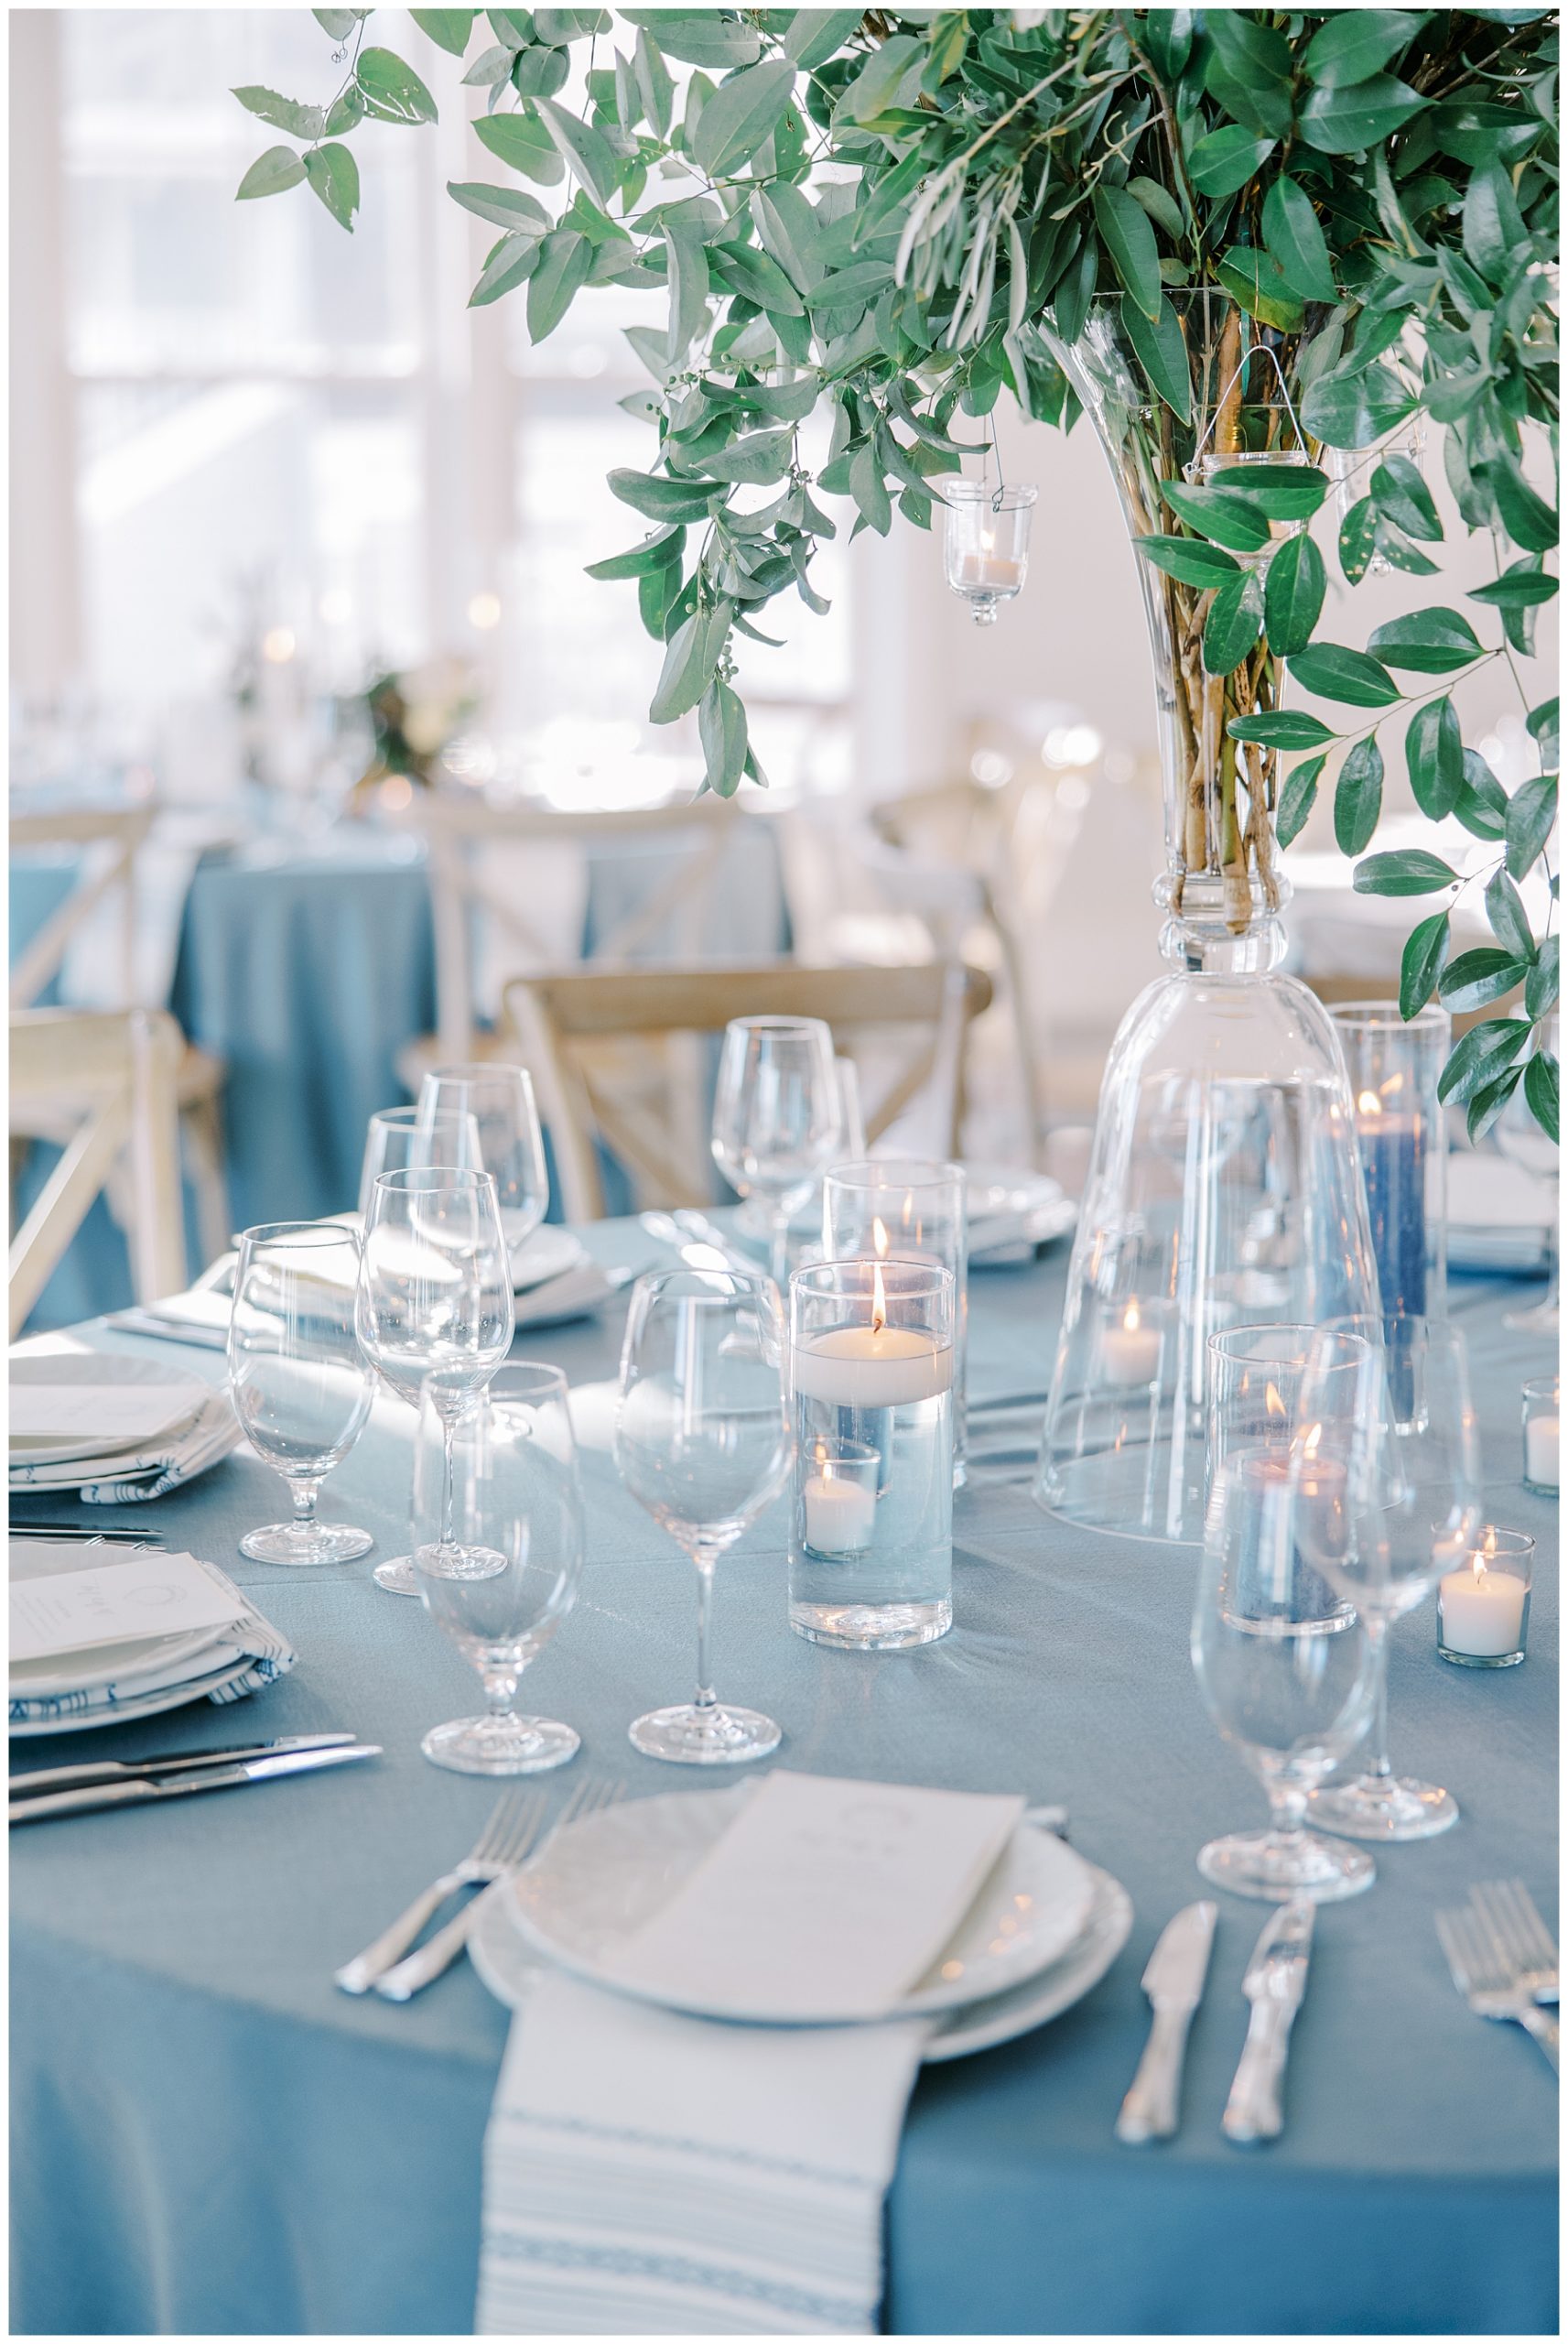 blue tablecloths and centerpieces of greenery at coastal wedding 